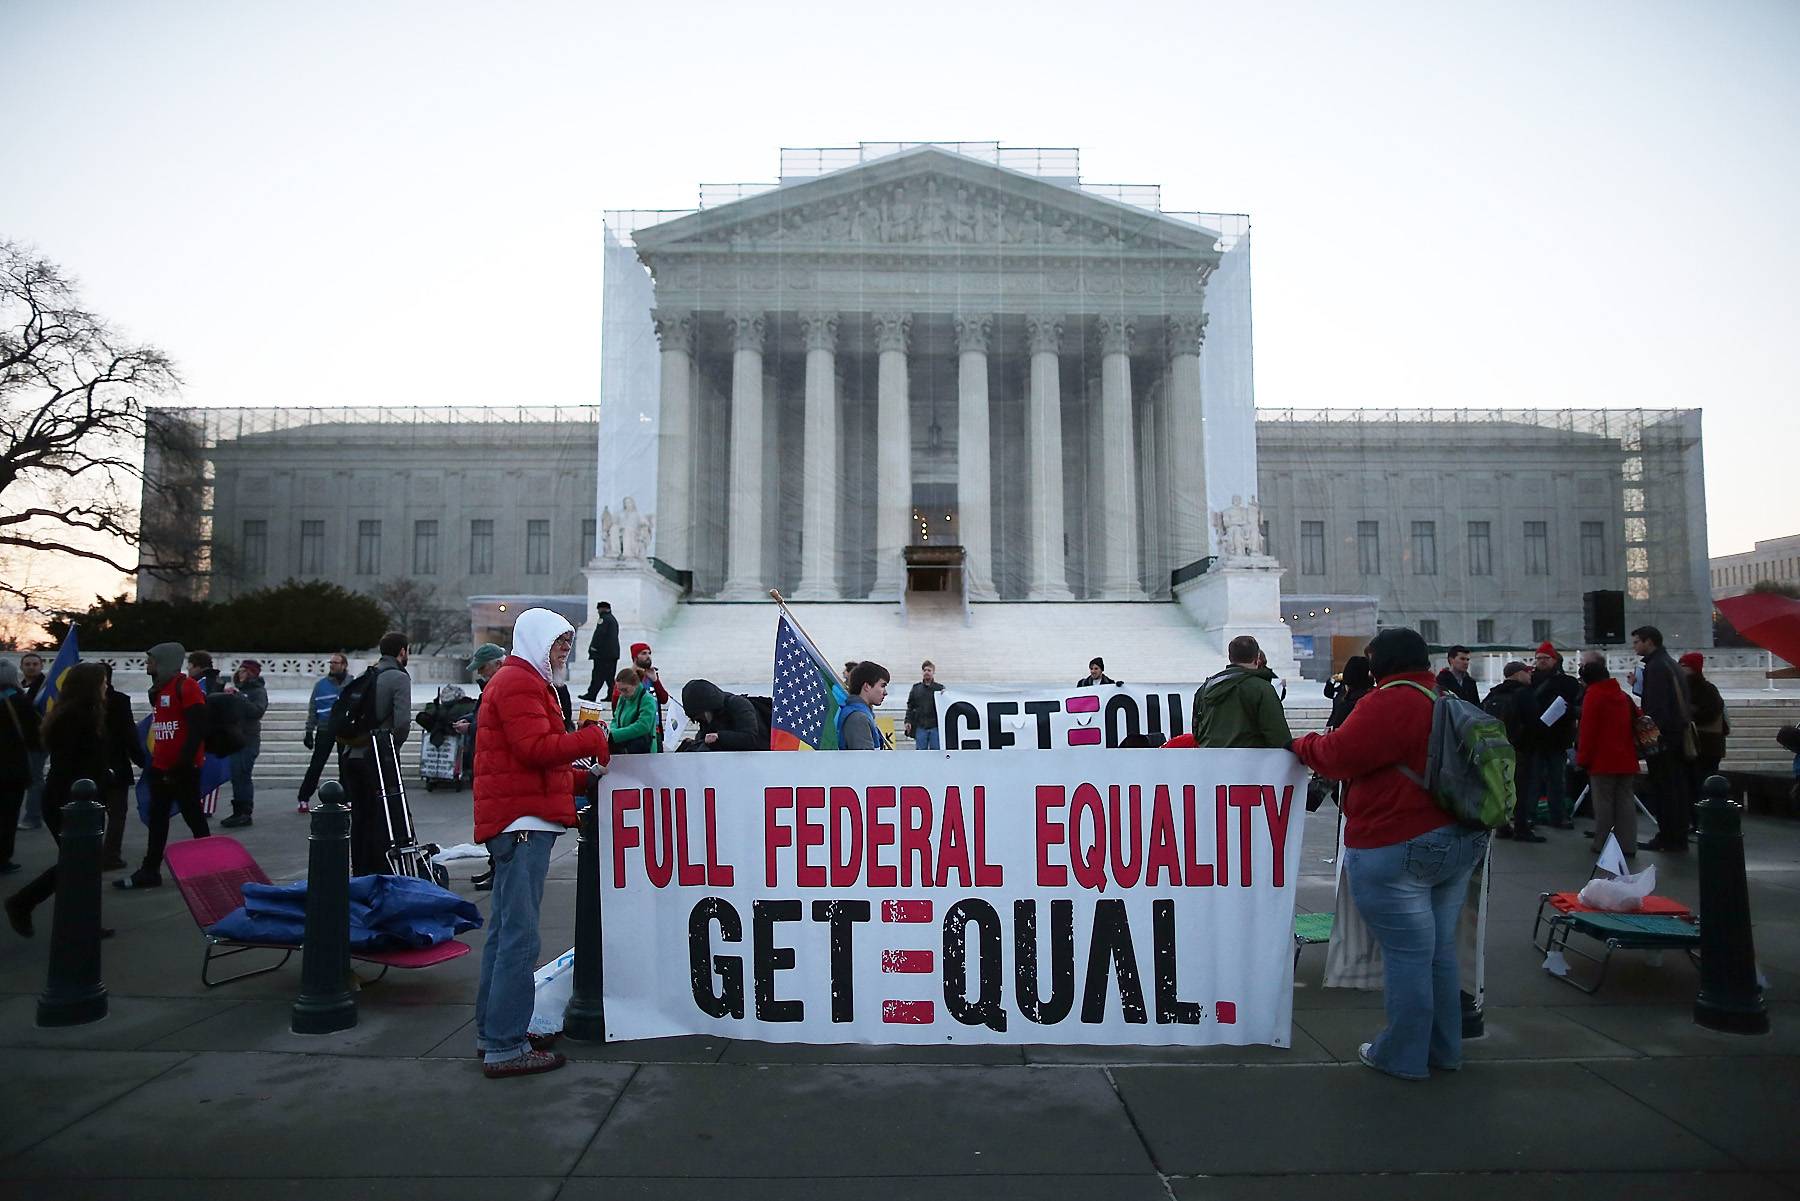 U.S. Supreme Court to Decide on Gay Marriage and Affirmative Action